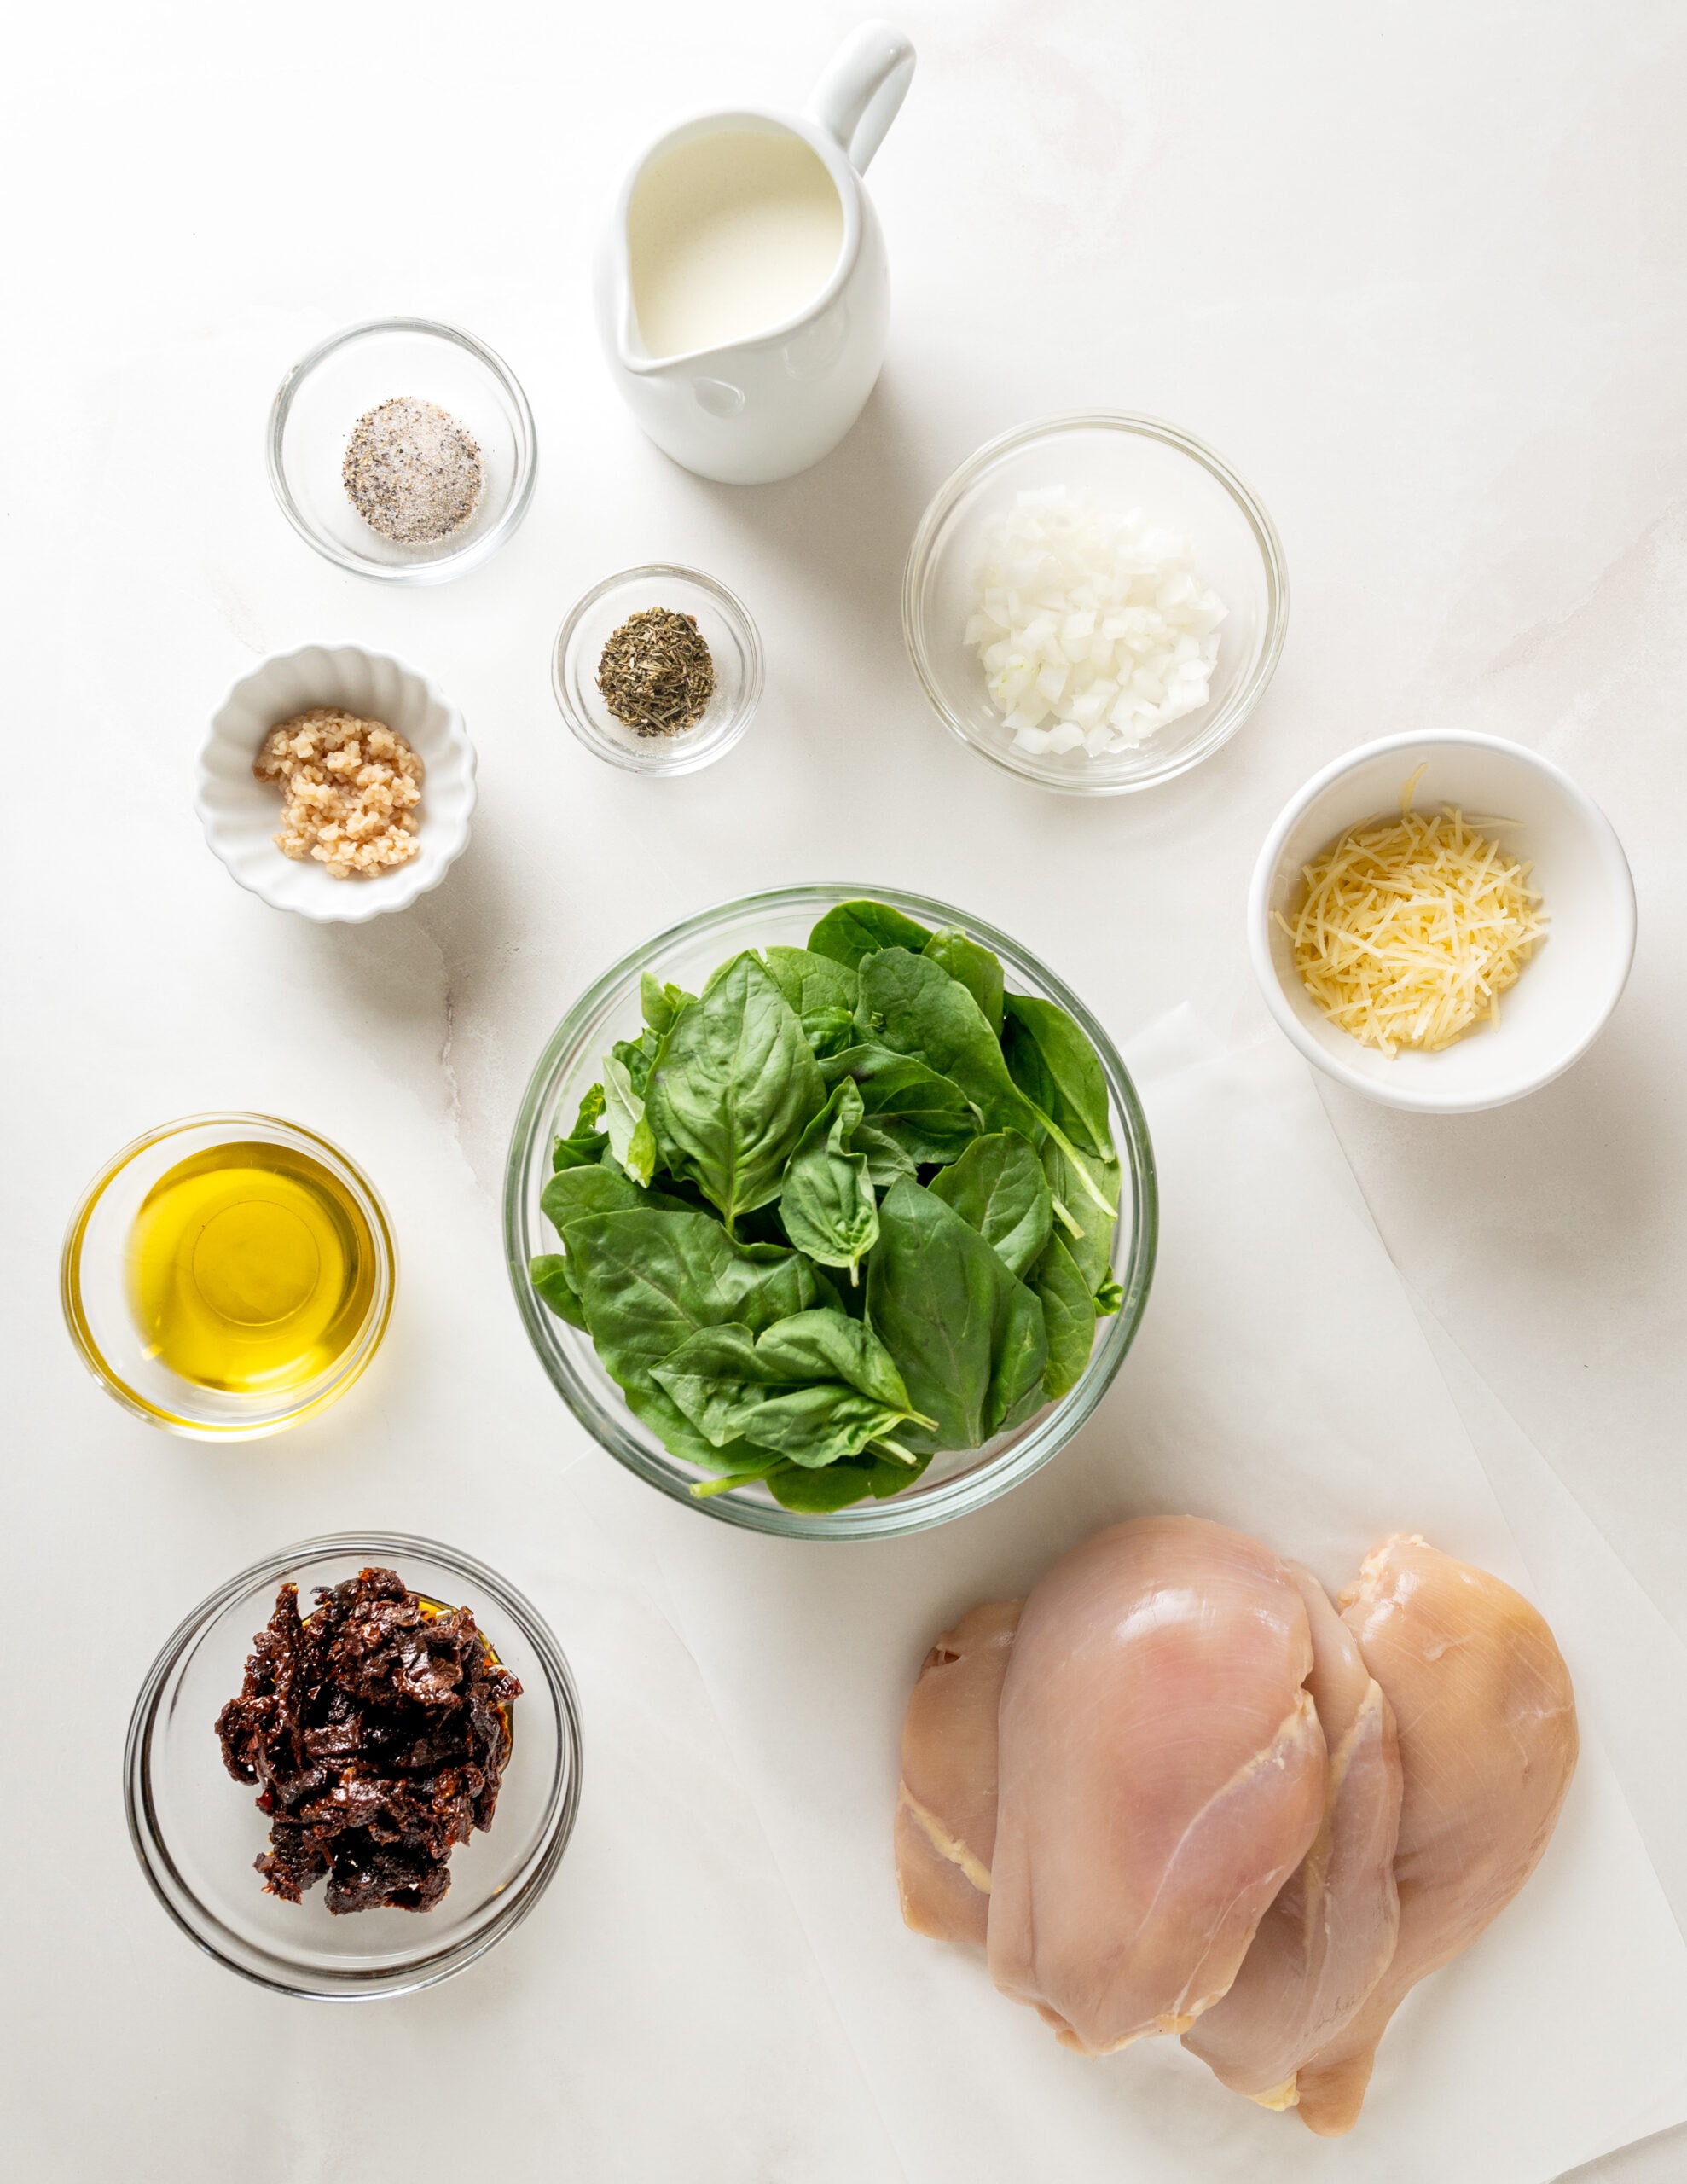 Ingredients for tuscan chicken. A large clear bowl of spinach and basil, alongside a bowl of sundried tomatoes, olive oil, parmesan cheese, yellow onion, heavy cream, minced garlic, salt, pepper, italian seasoning, and chicken breasts. 